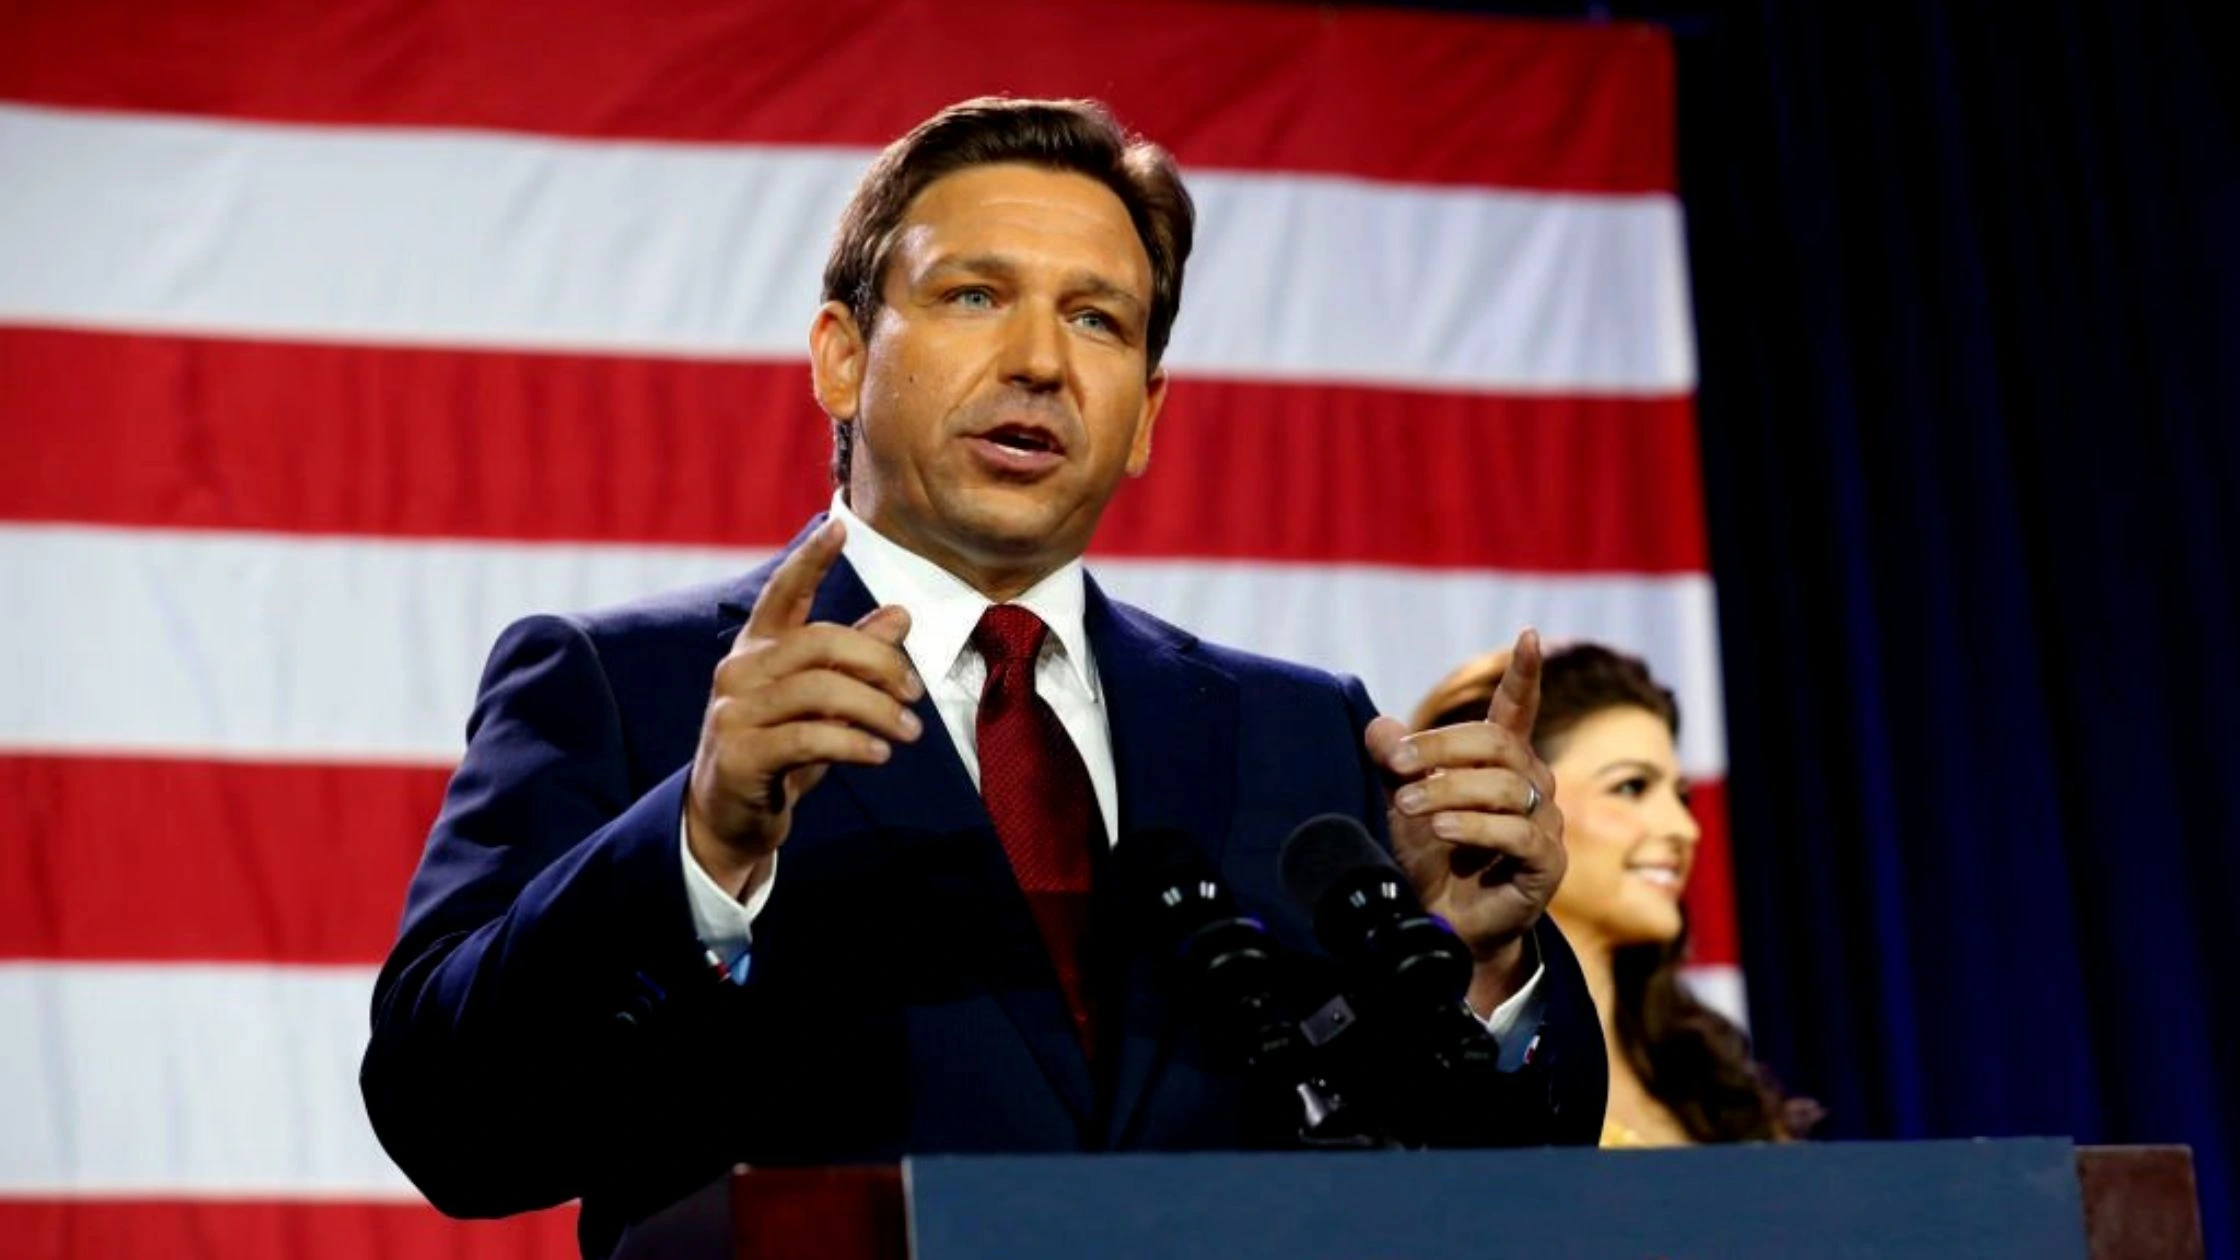 Florida Governor Ron DeSantis Proposes Initiatives To Enact Covid-19 Changes Permanent